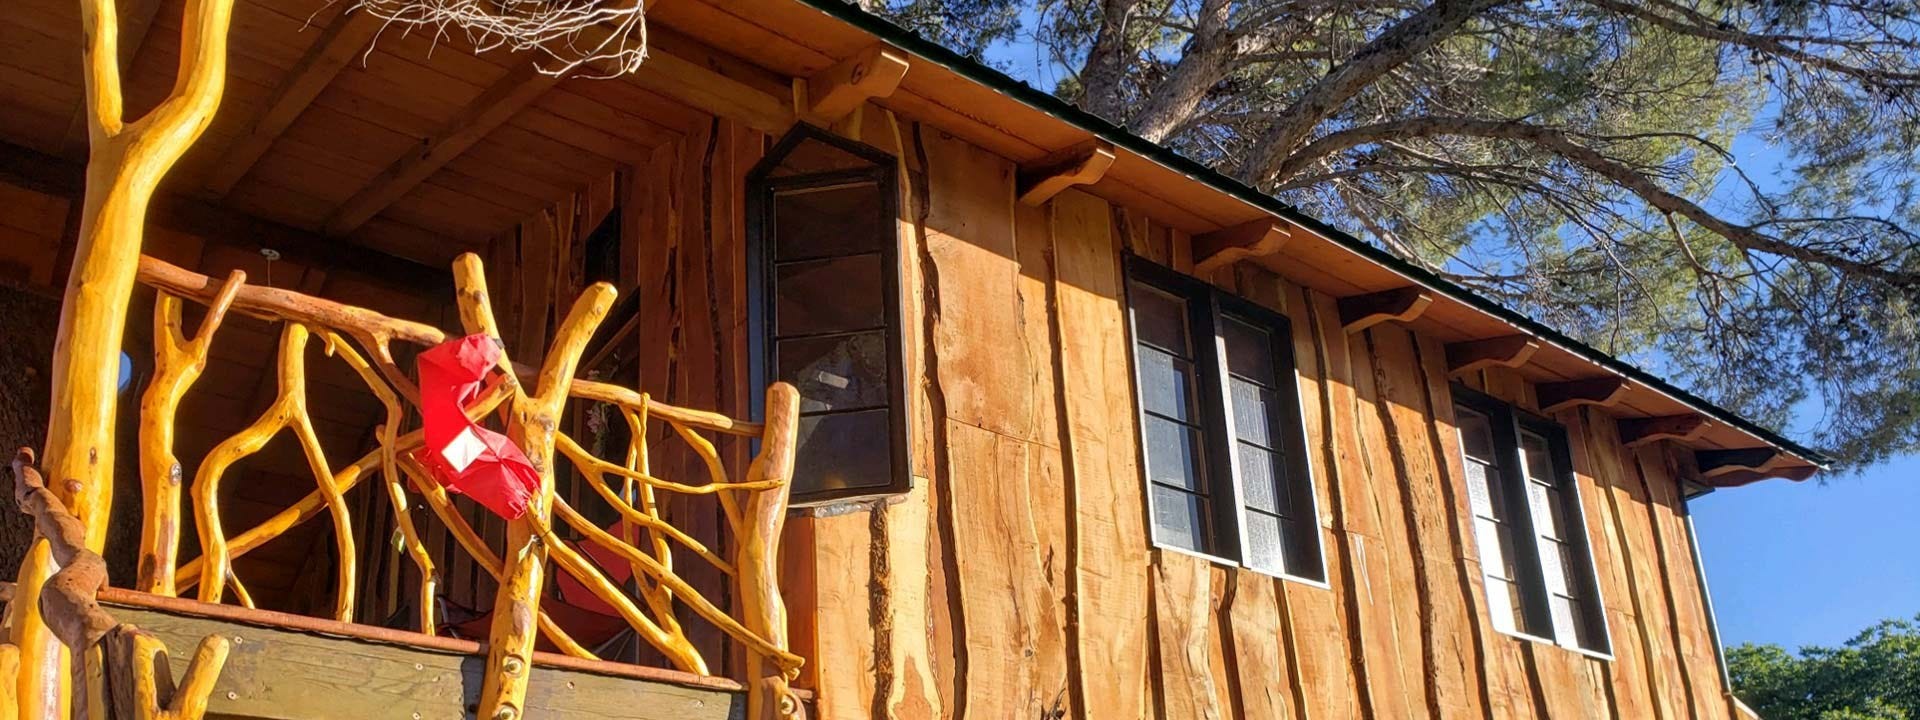 Mesquite Treehouse Milled and Made in Southern Arizona